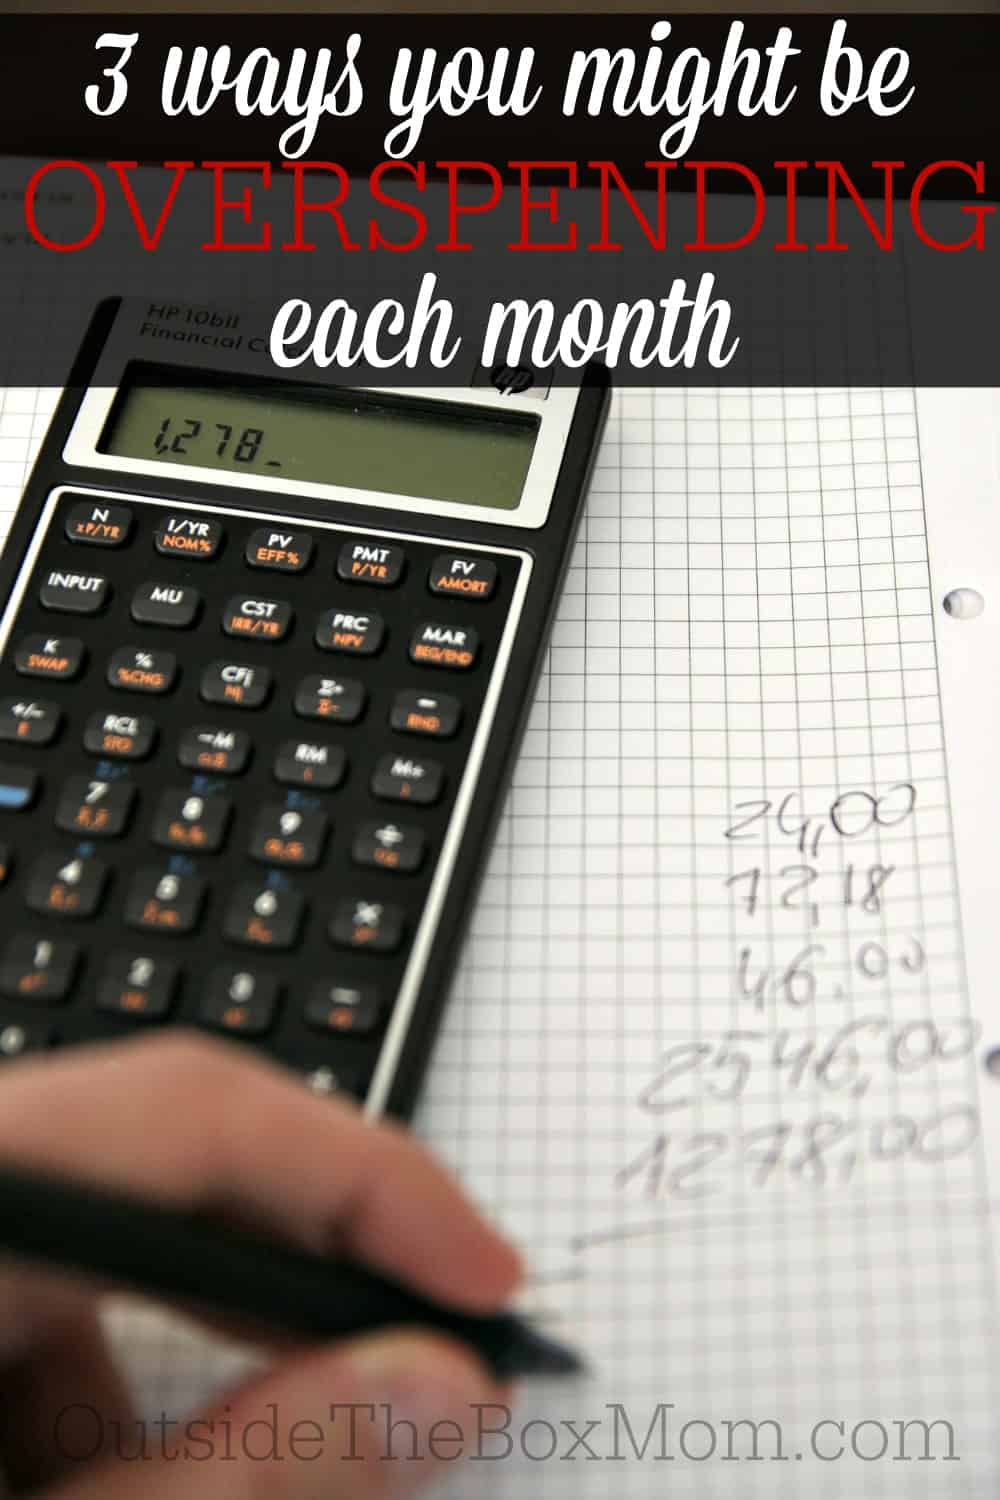 Learn about three important monthly expenses you should review to ensure you're not overspending.